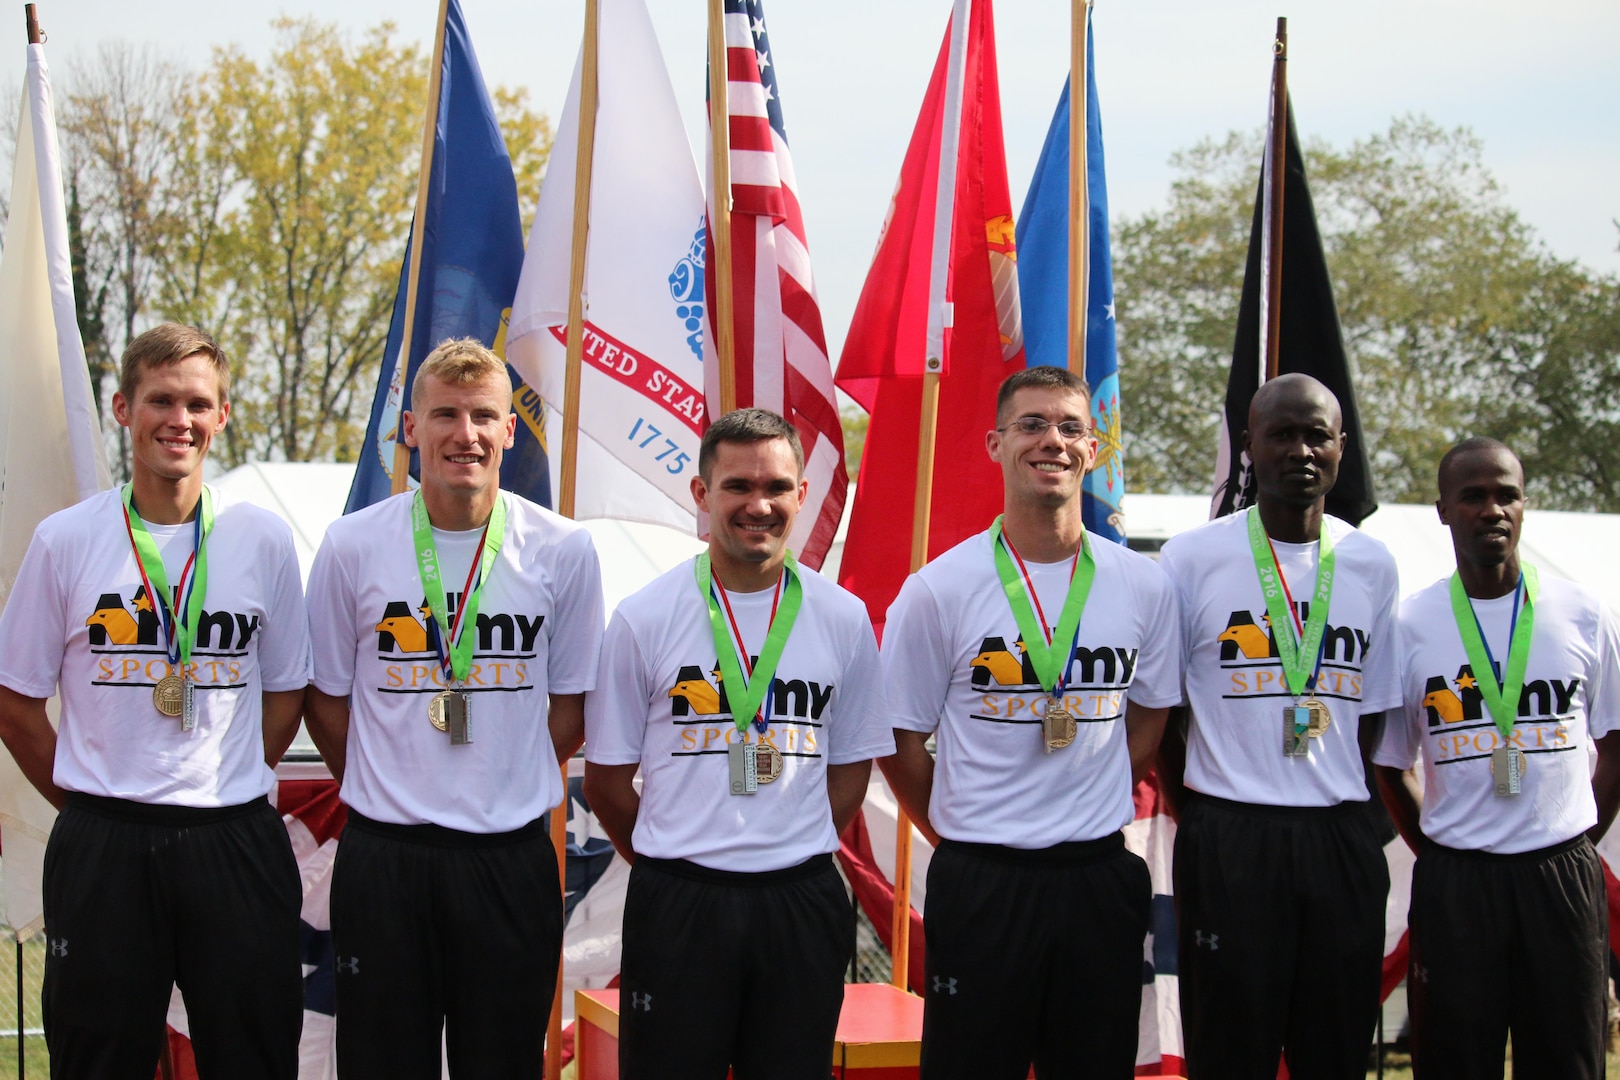 Army wins Armed Forces Men's Marathon gold.  The 2016 Armed Forces Marathon is held in conjunction with the 41st Marine Corps Marathon on 30 October in Washington, D.C. 1st - SPC Samuel Kosgei, Fort Riley, Kan. - 2:23:53; 2nd - CPT Kenneth Foster, Denver, Colo. - 2:28:02; 3rd - SPC David Kiplaget, Fort Carson, Colo. - 2:33:31; 4th - CPT Chad Ware, Fort Bragg, N.C. - 2:33:57; 9th - SSG Norman Mininger, Fort Leavenworth, Kan. - 2:40:42; 23rd - 1LT Bryce Livingston, Fort Drum, N.Y. - 3:04:17